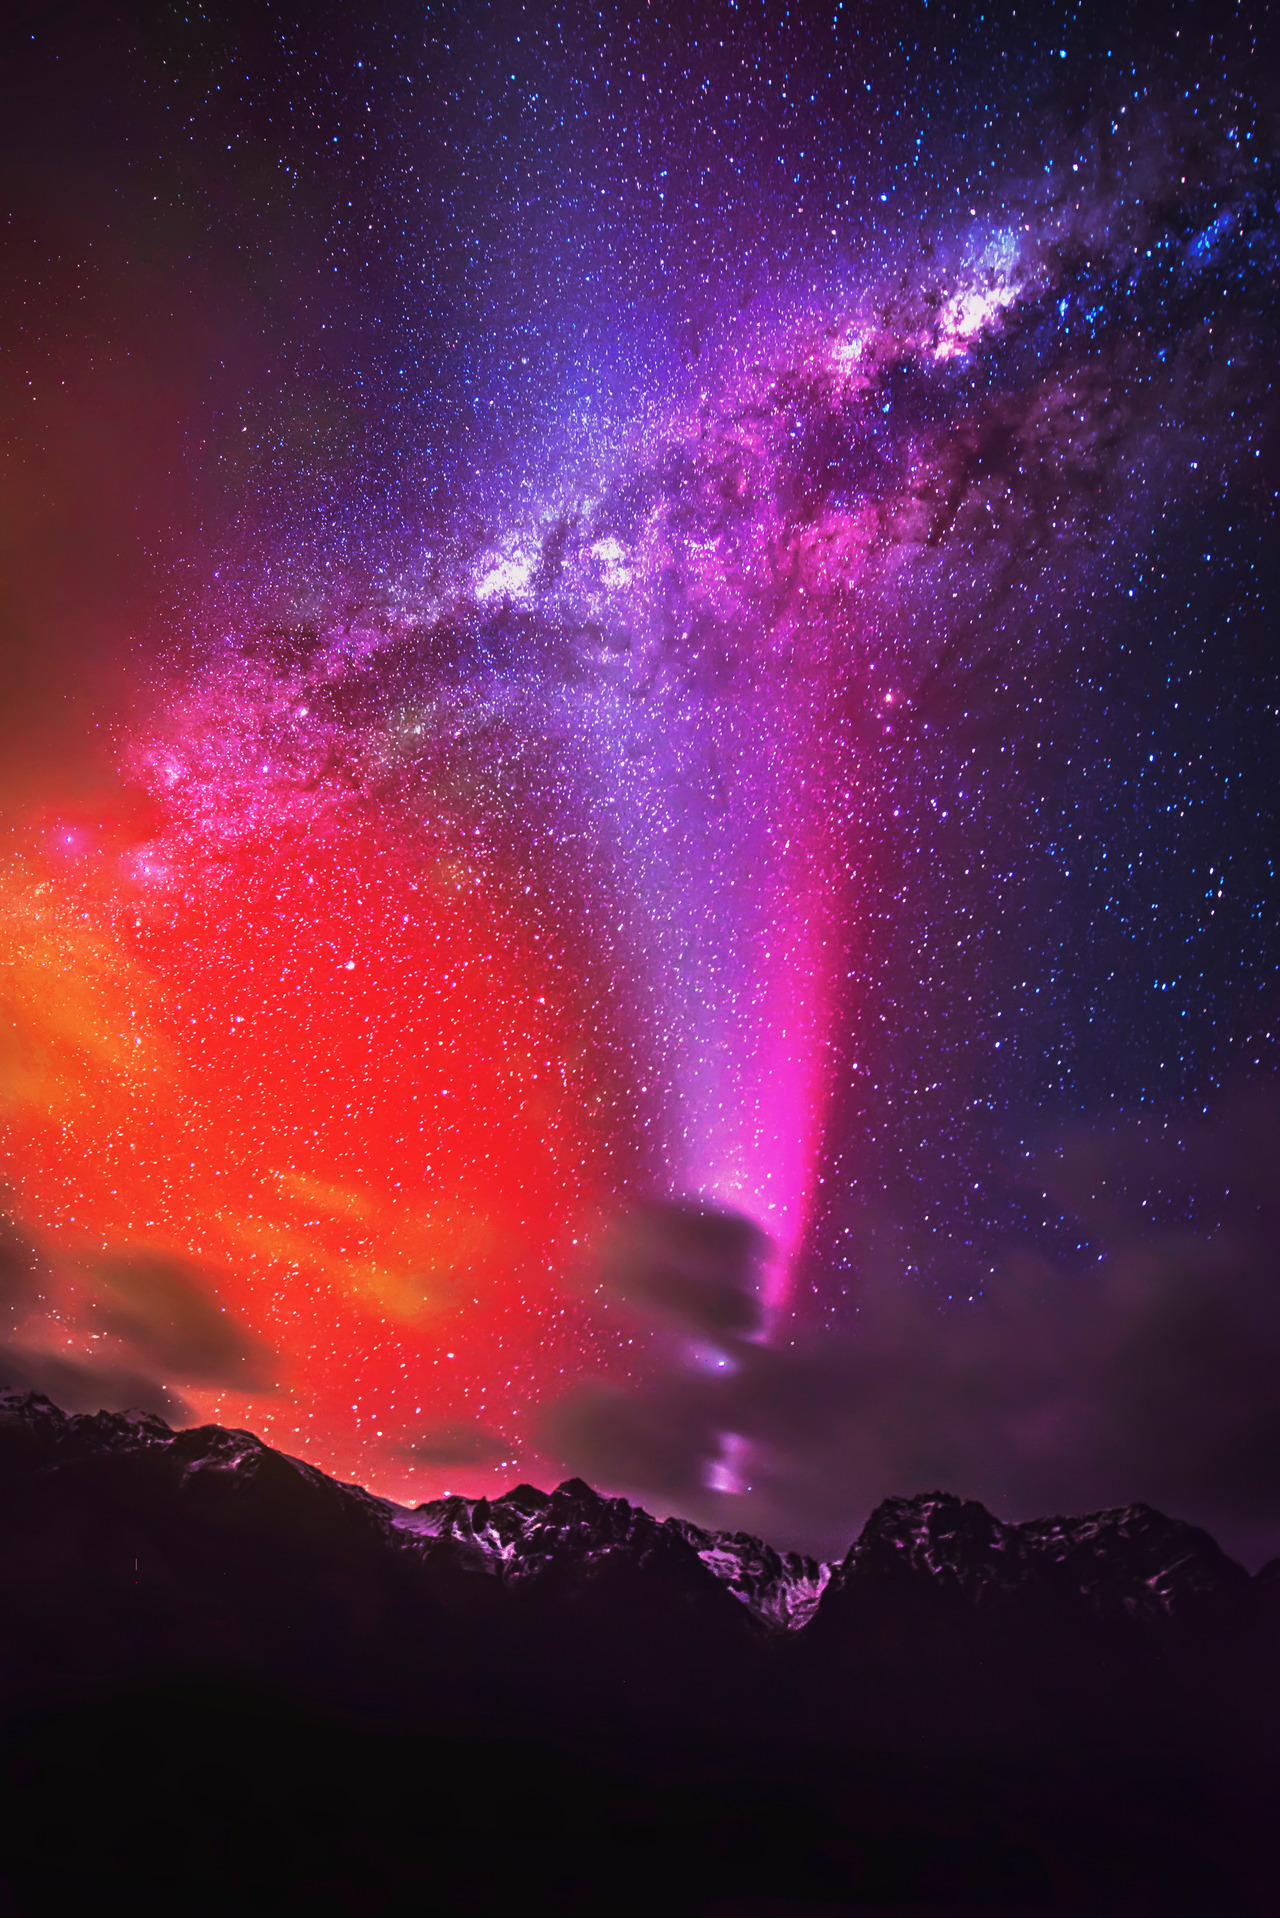 newclearfusion: The Comet in Queenstown by Stuck in Customs on Flickr. Edited by Me 